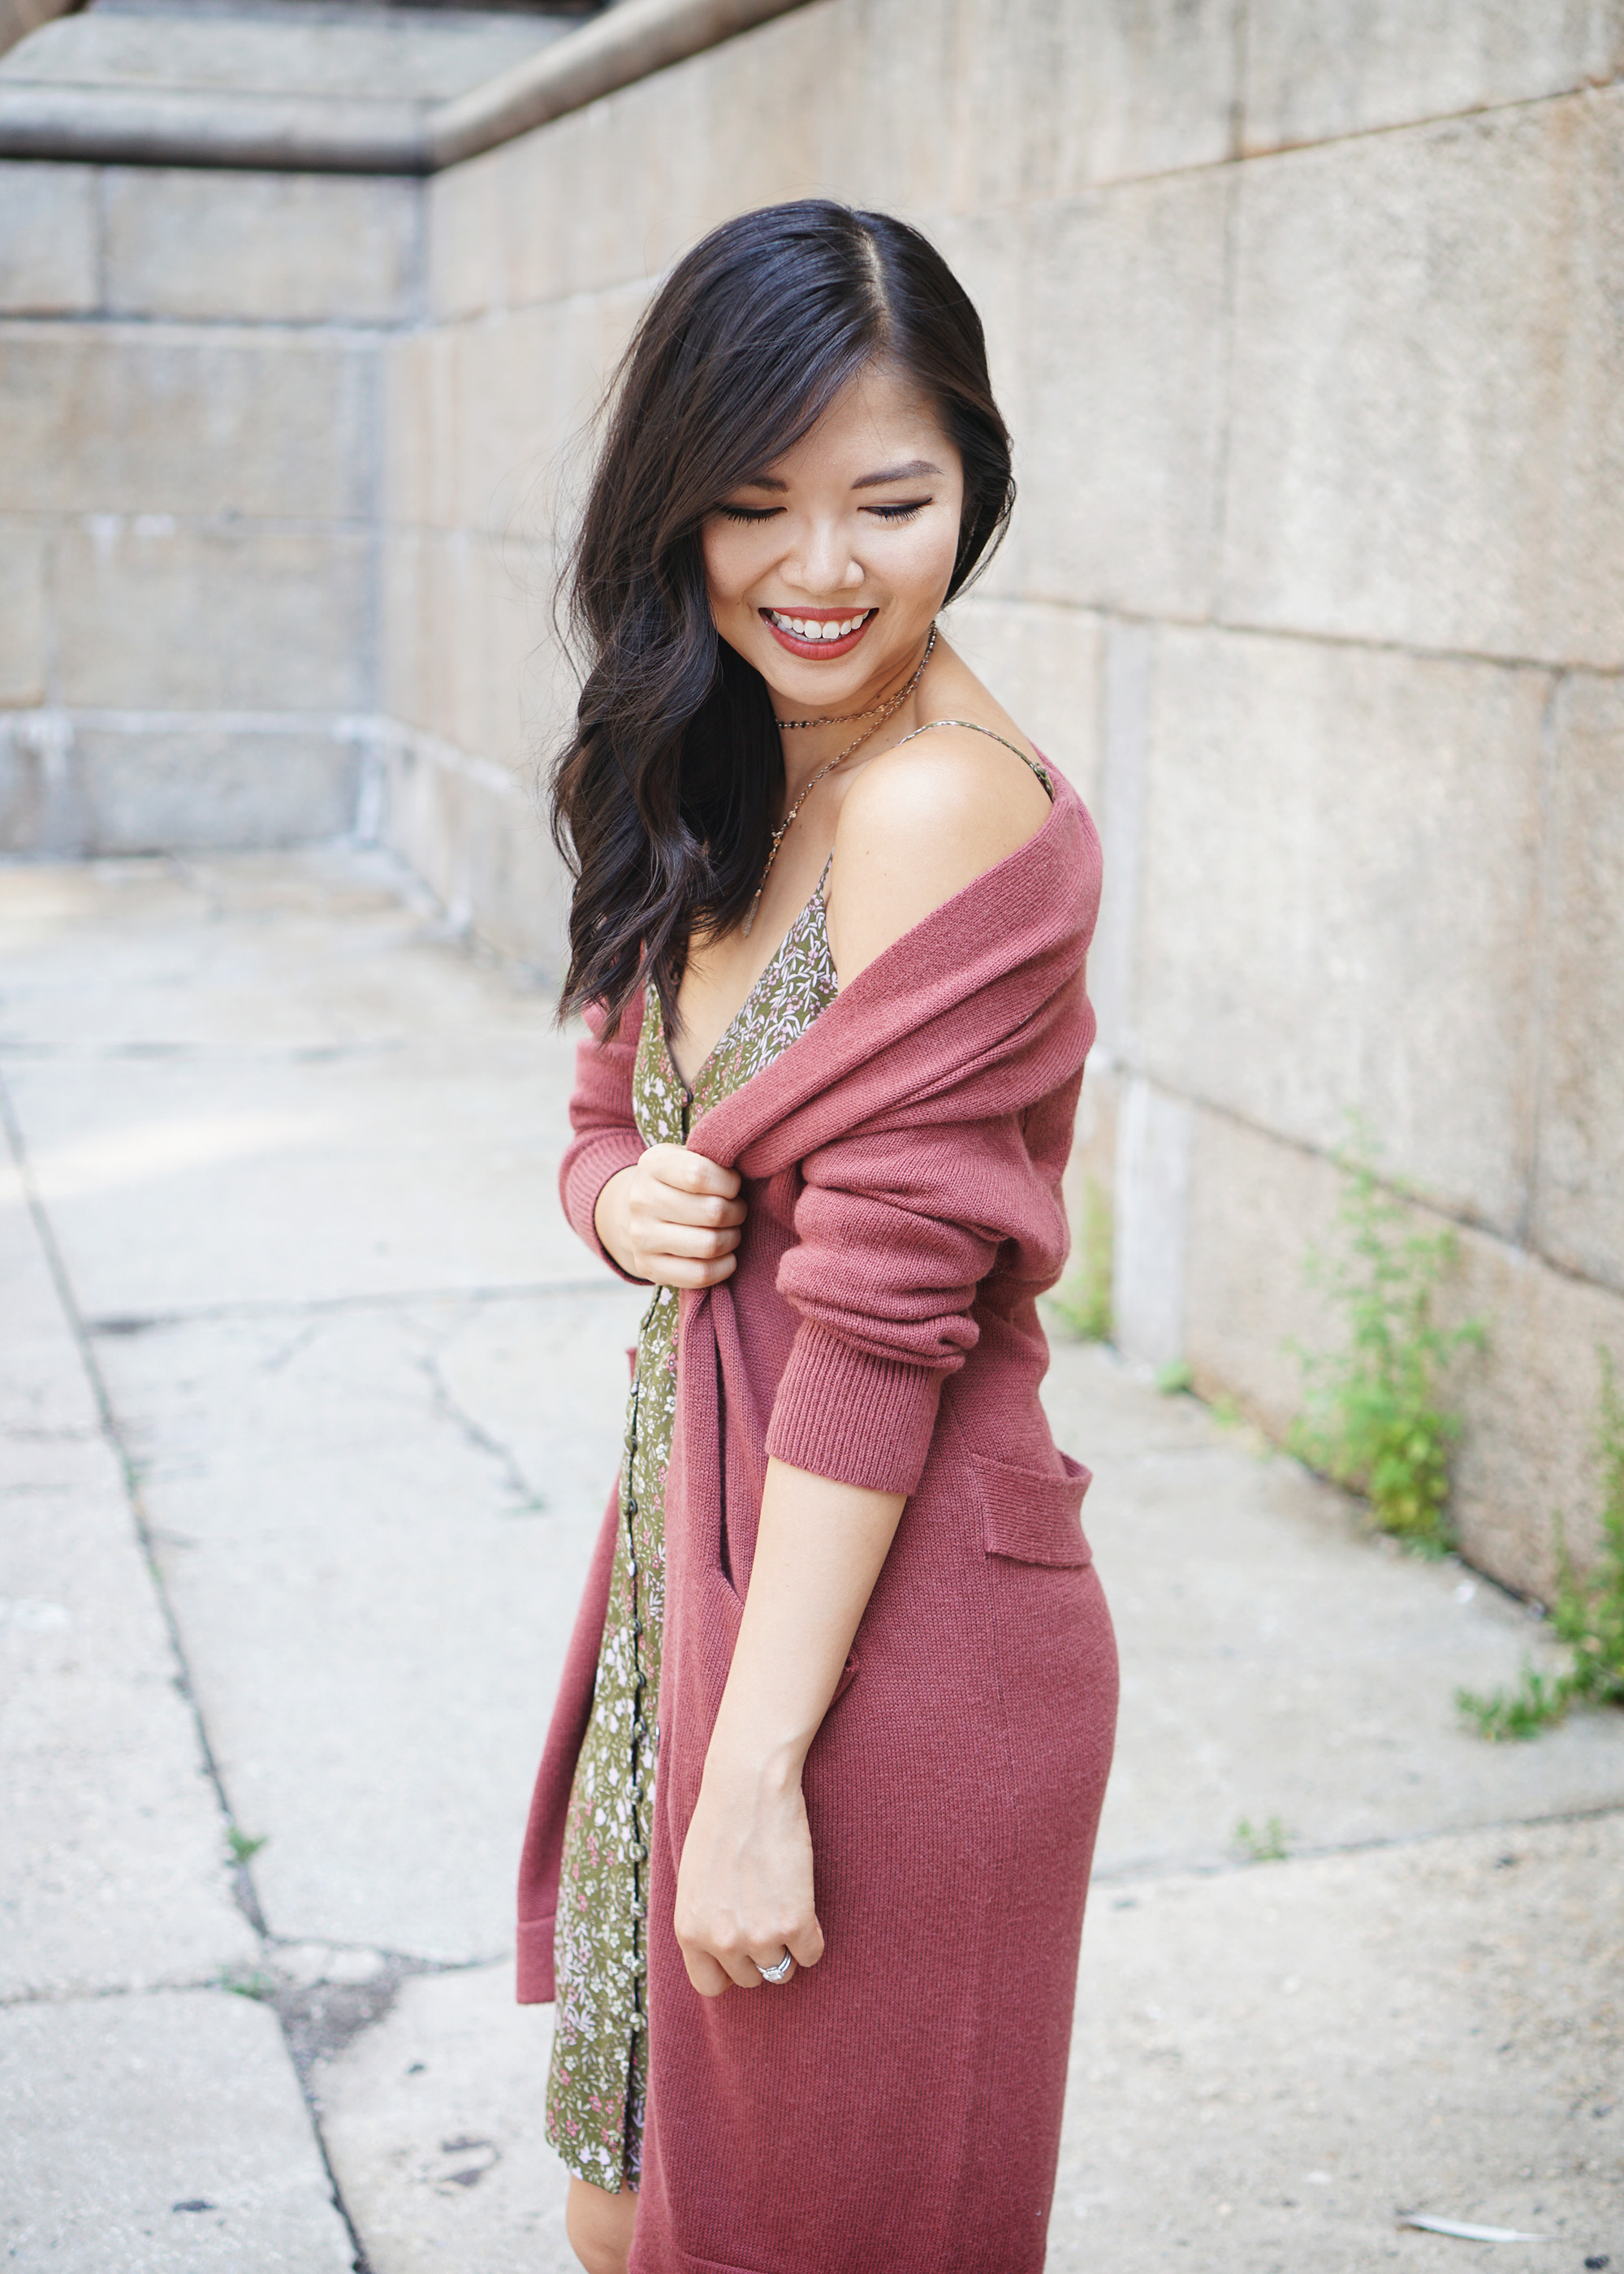 Fall Outfit Inspiration: Long Cardigan & Floral Slip Dress